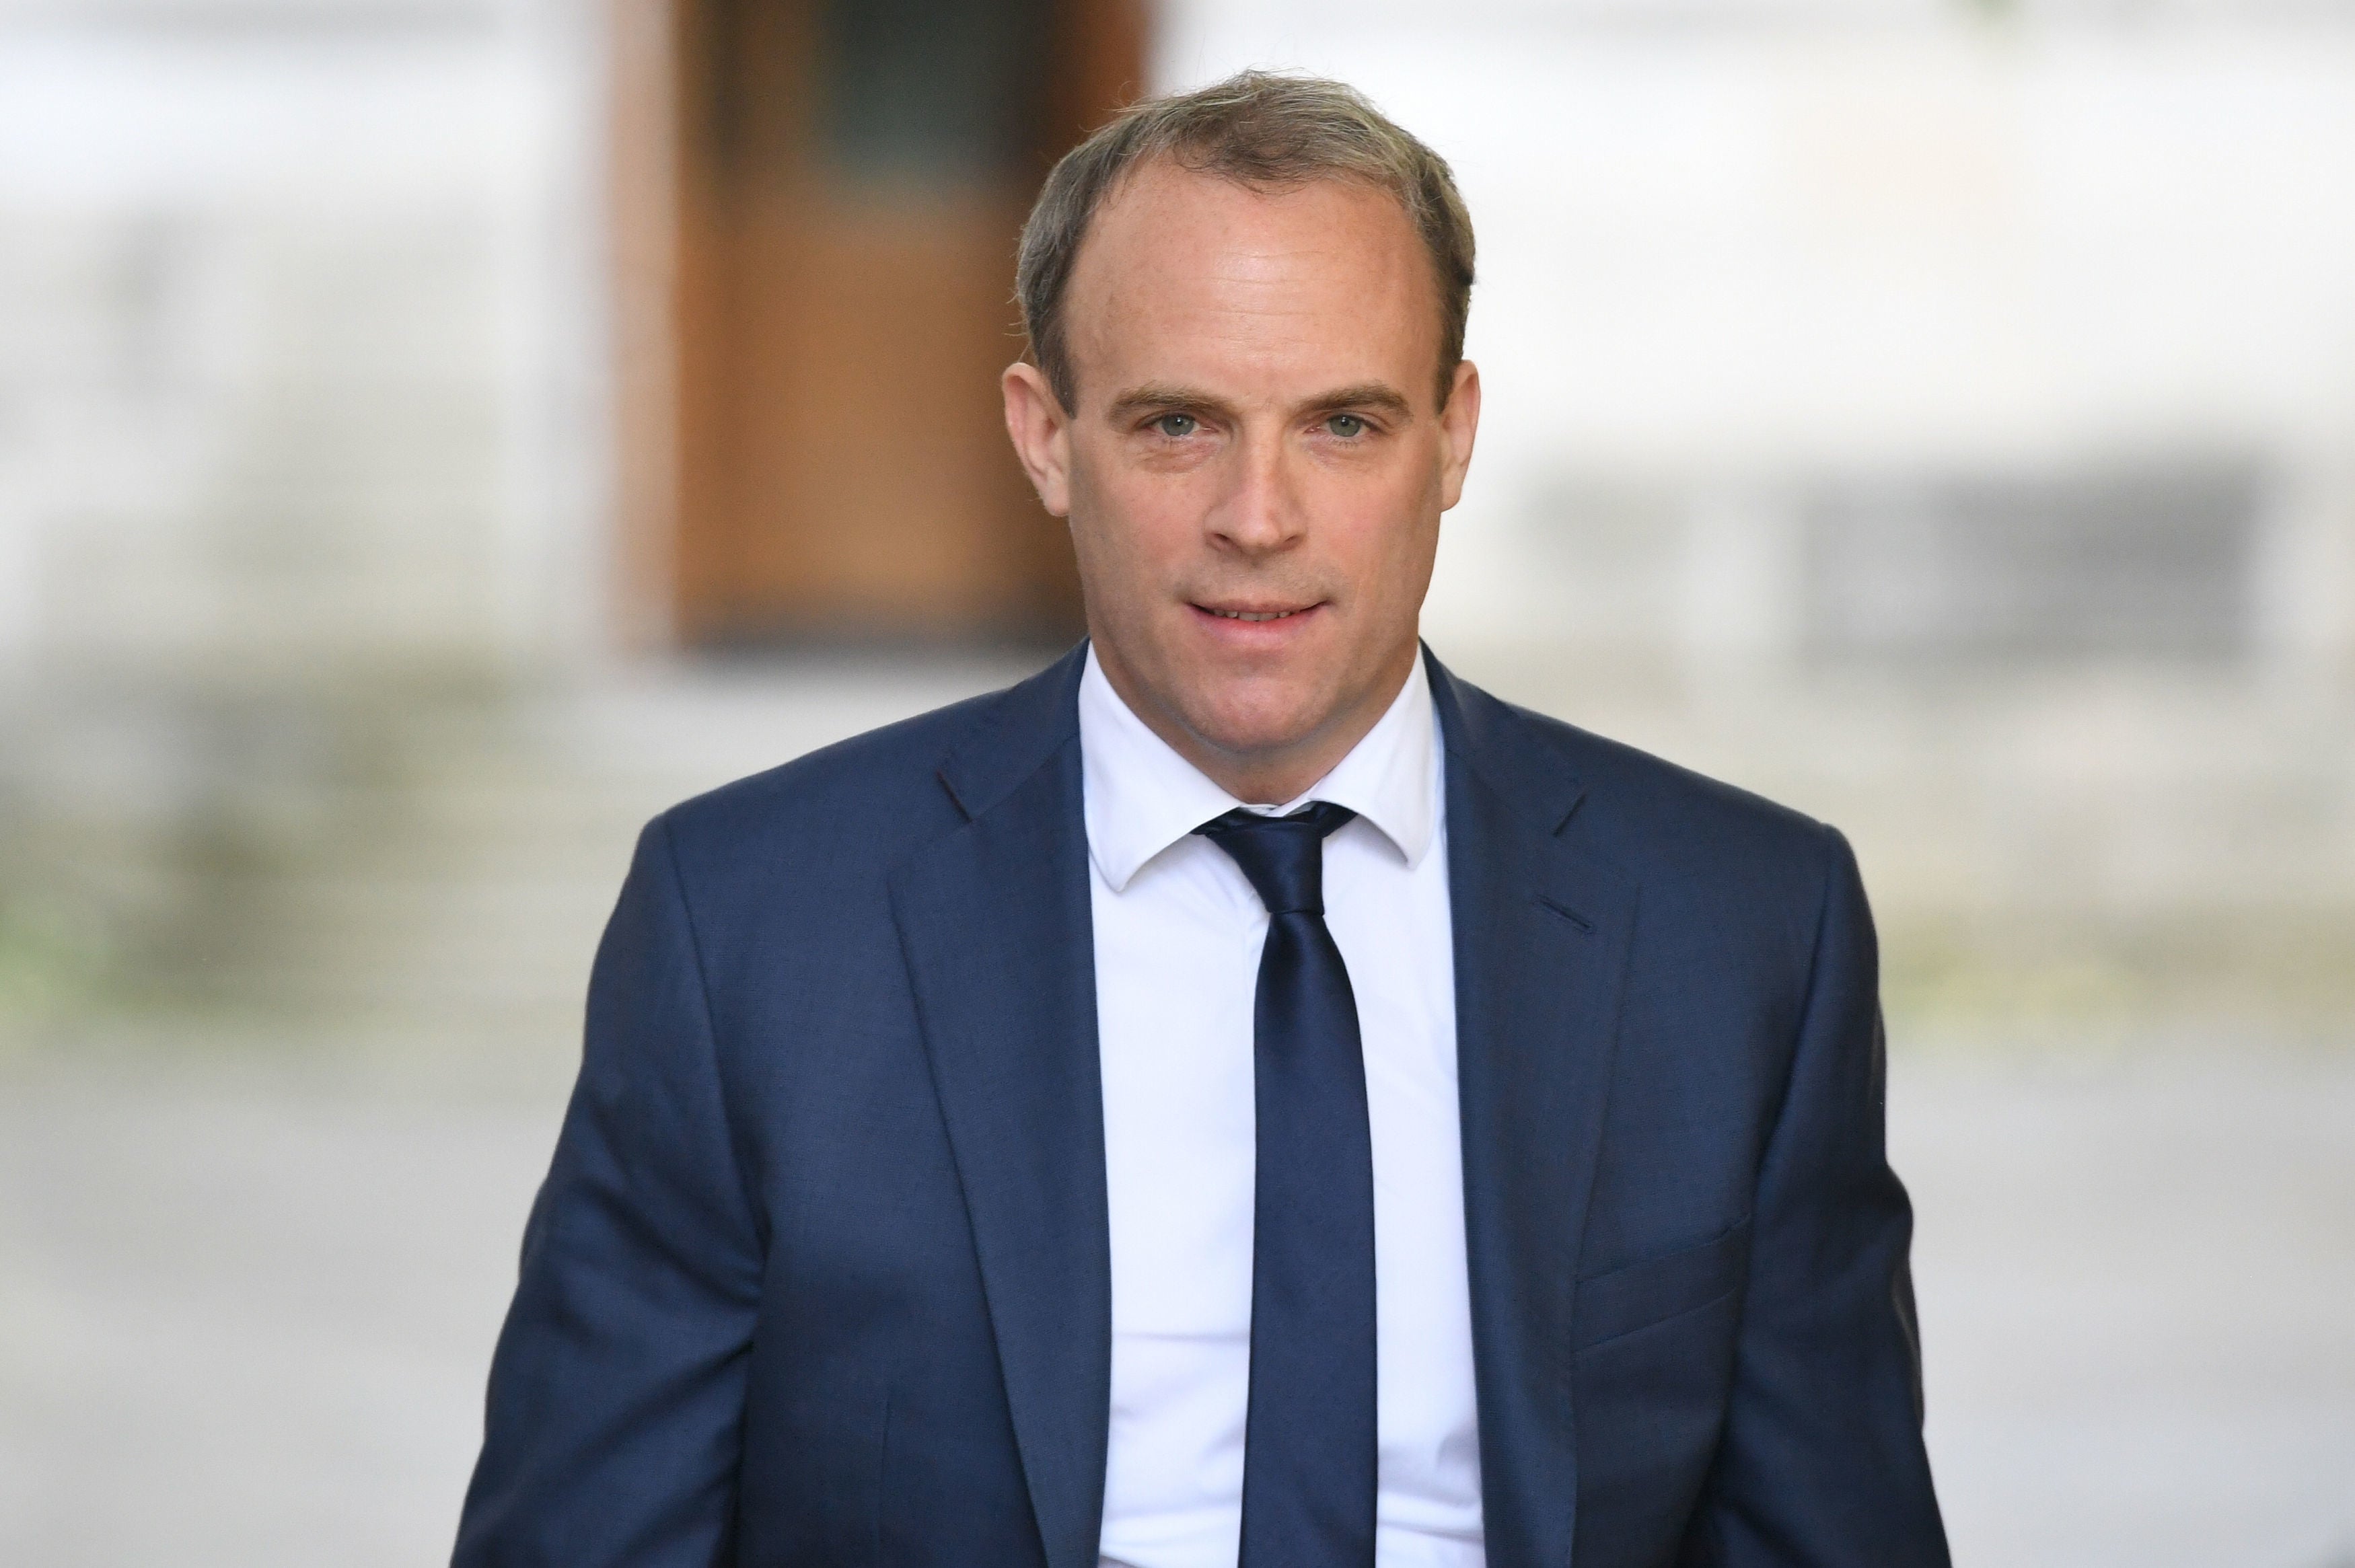 Mr Raab says the government will repatriate children as long as they do not pose a security threat